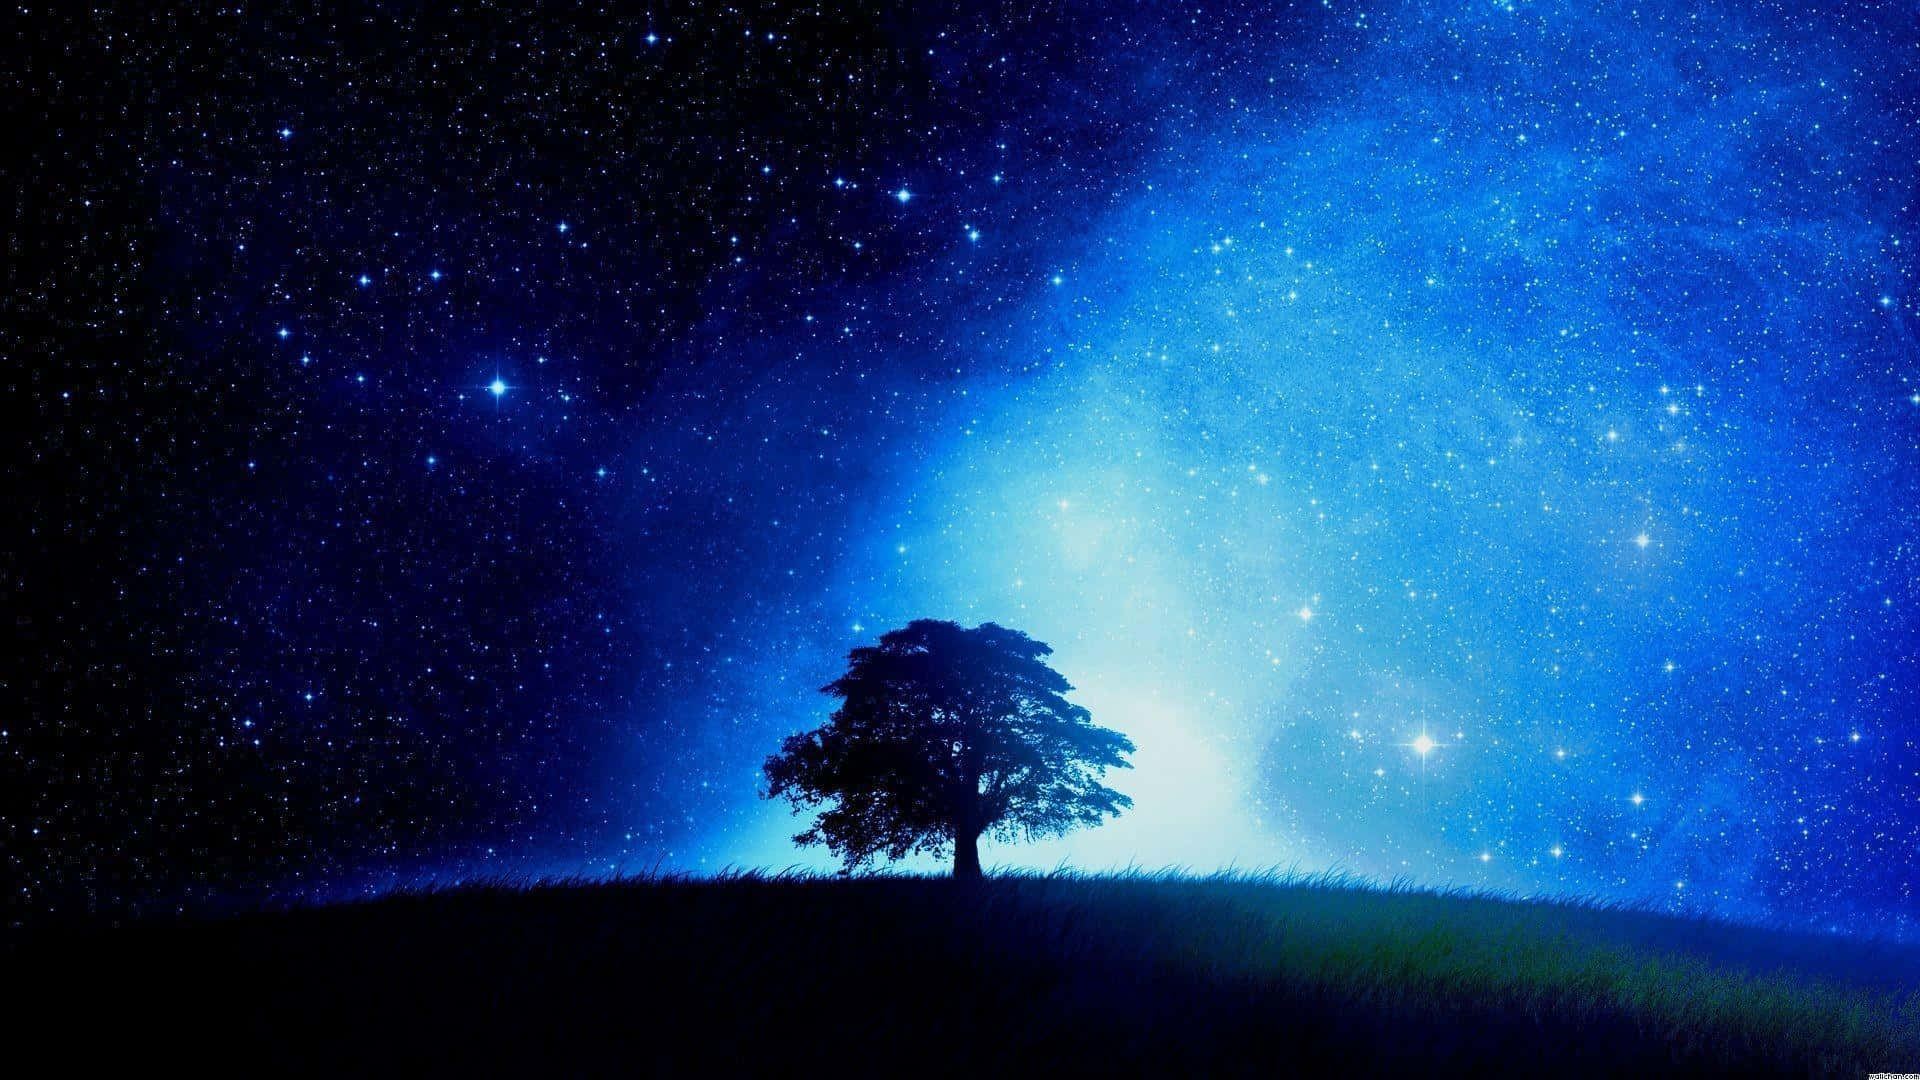 Find beauty within the night sky